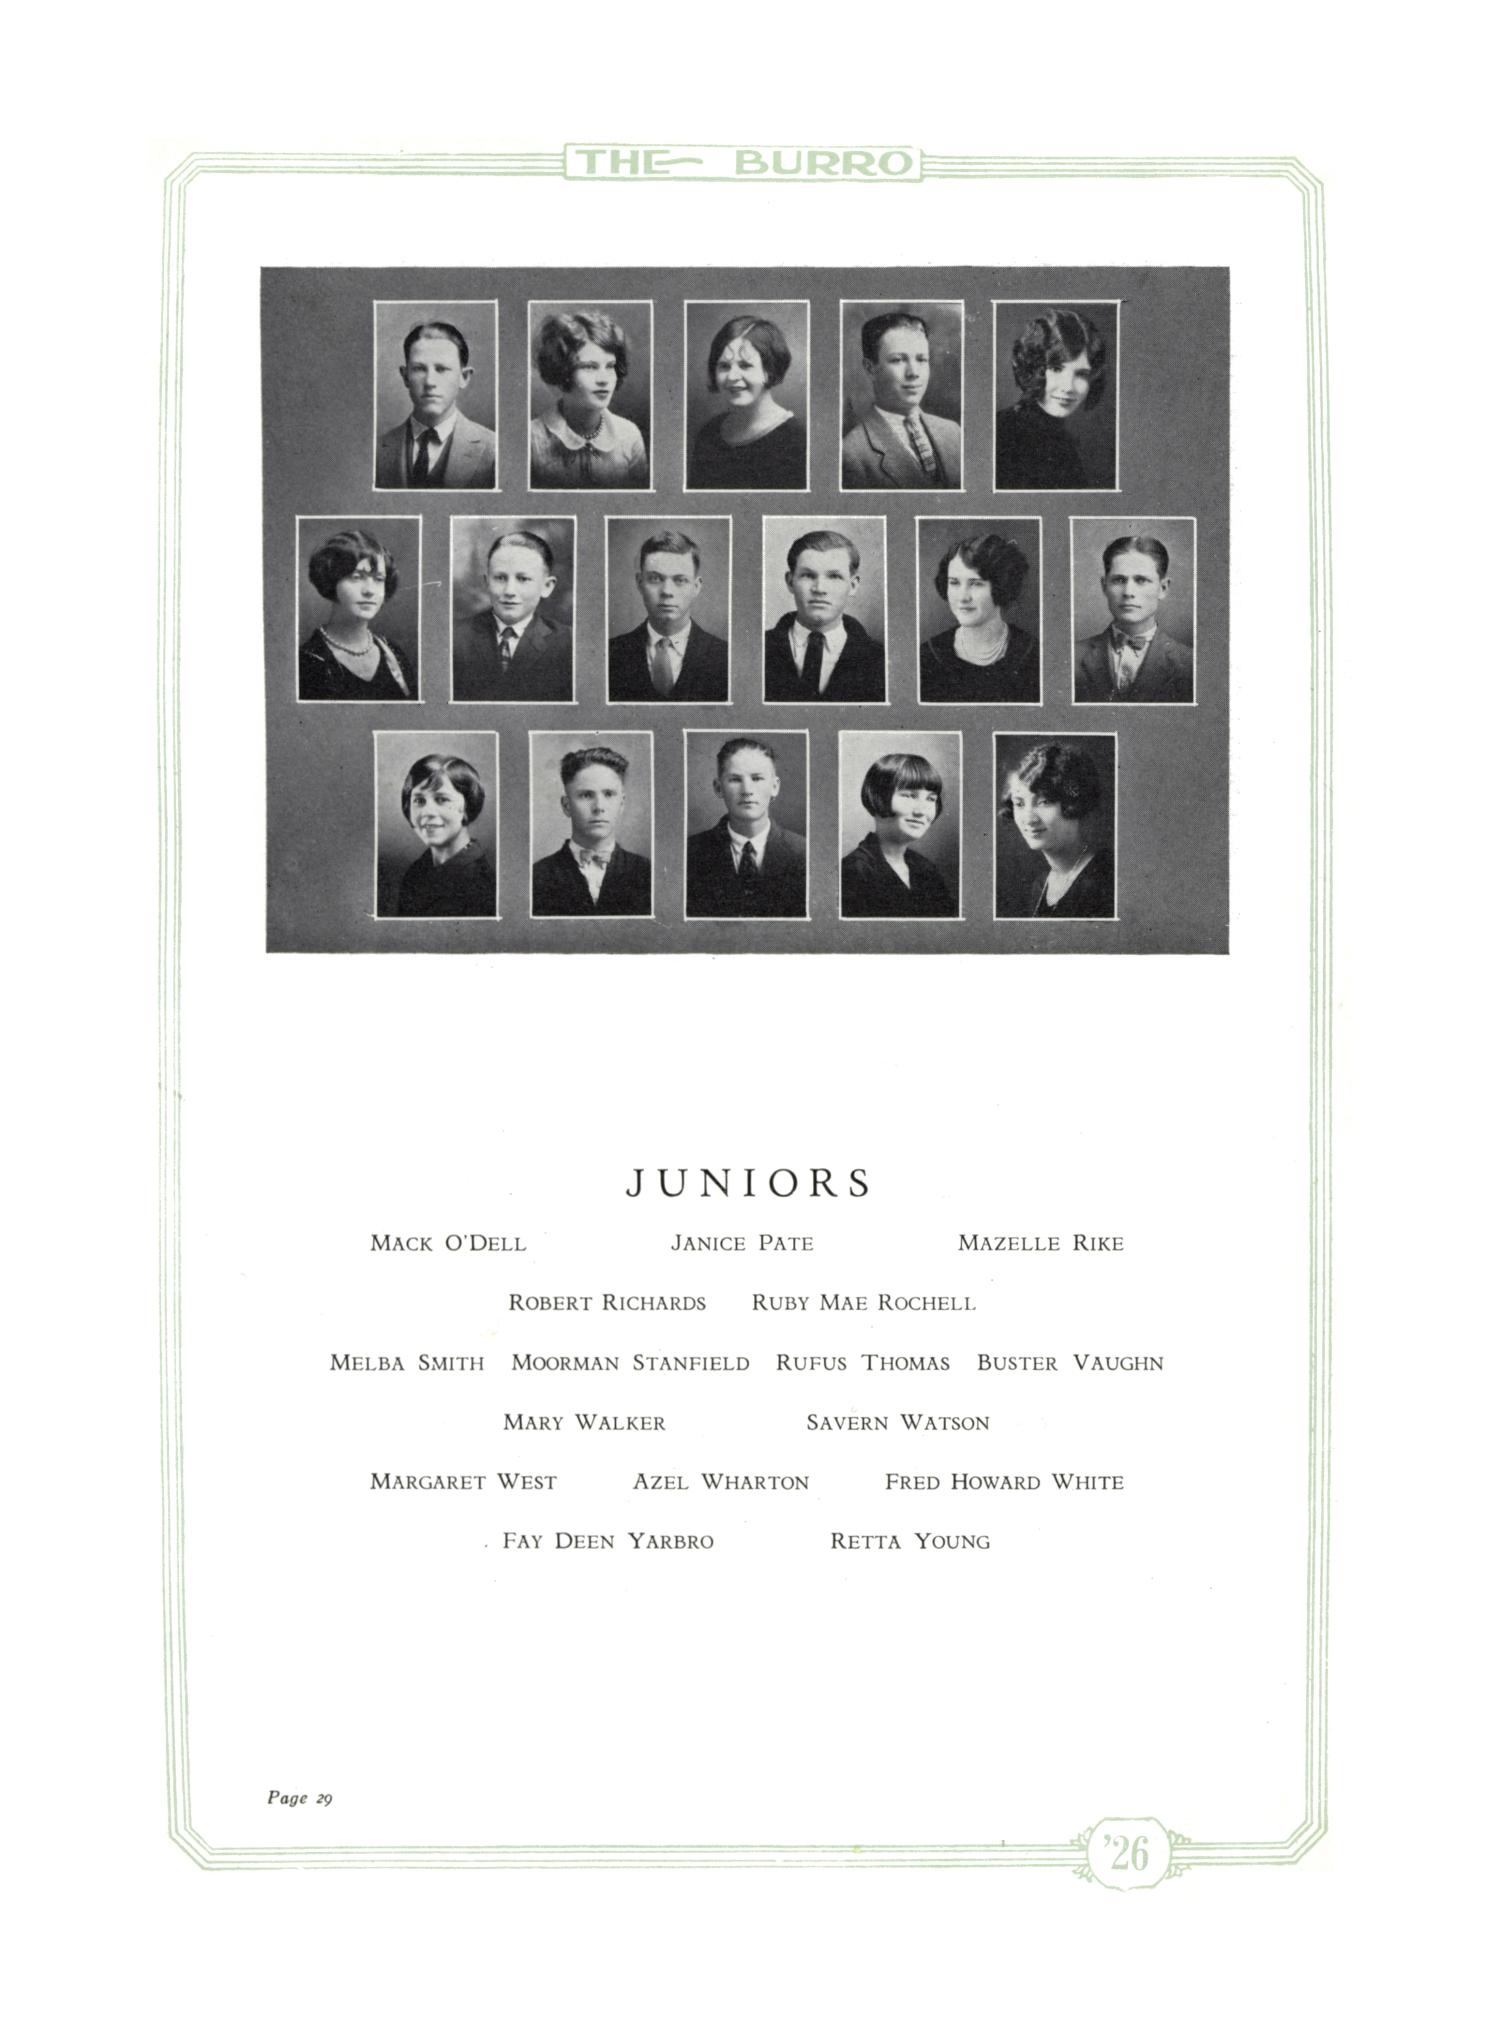 The Burro, Yearbook of Mineral Wells High School, 1926
                                                
                                                    29
                                                